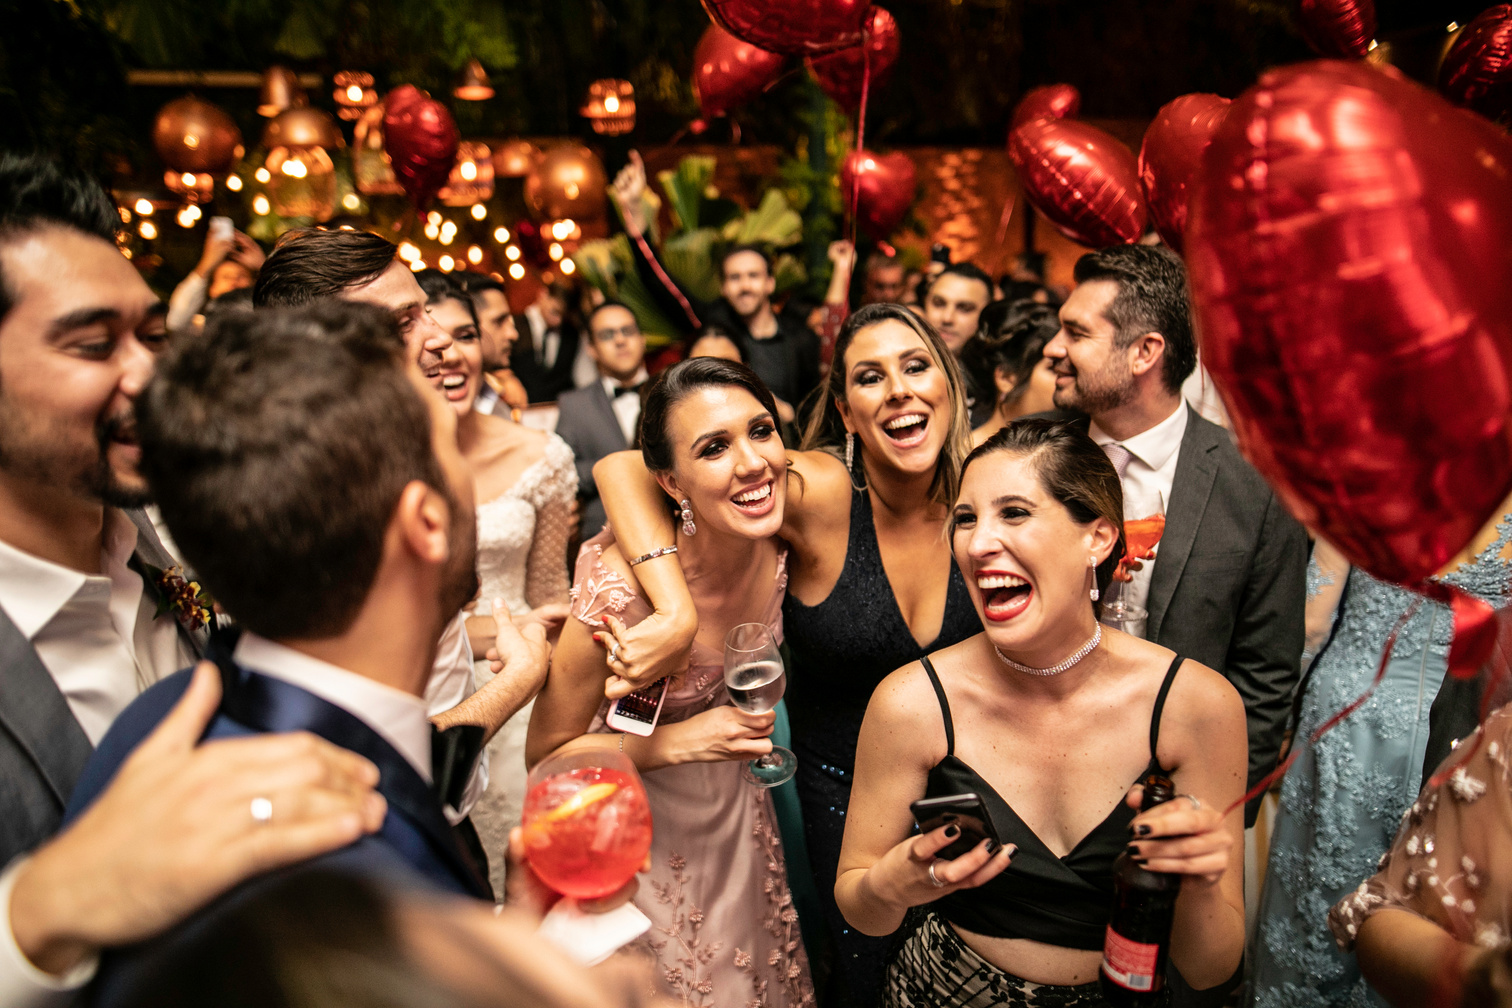 Groom and wedding guests laughing during party